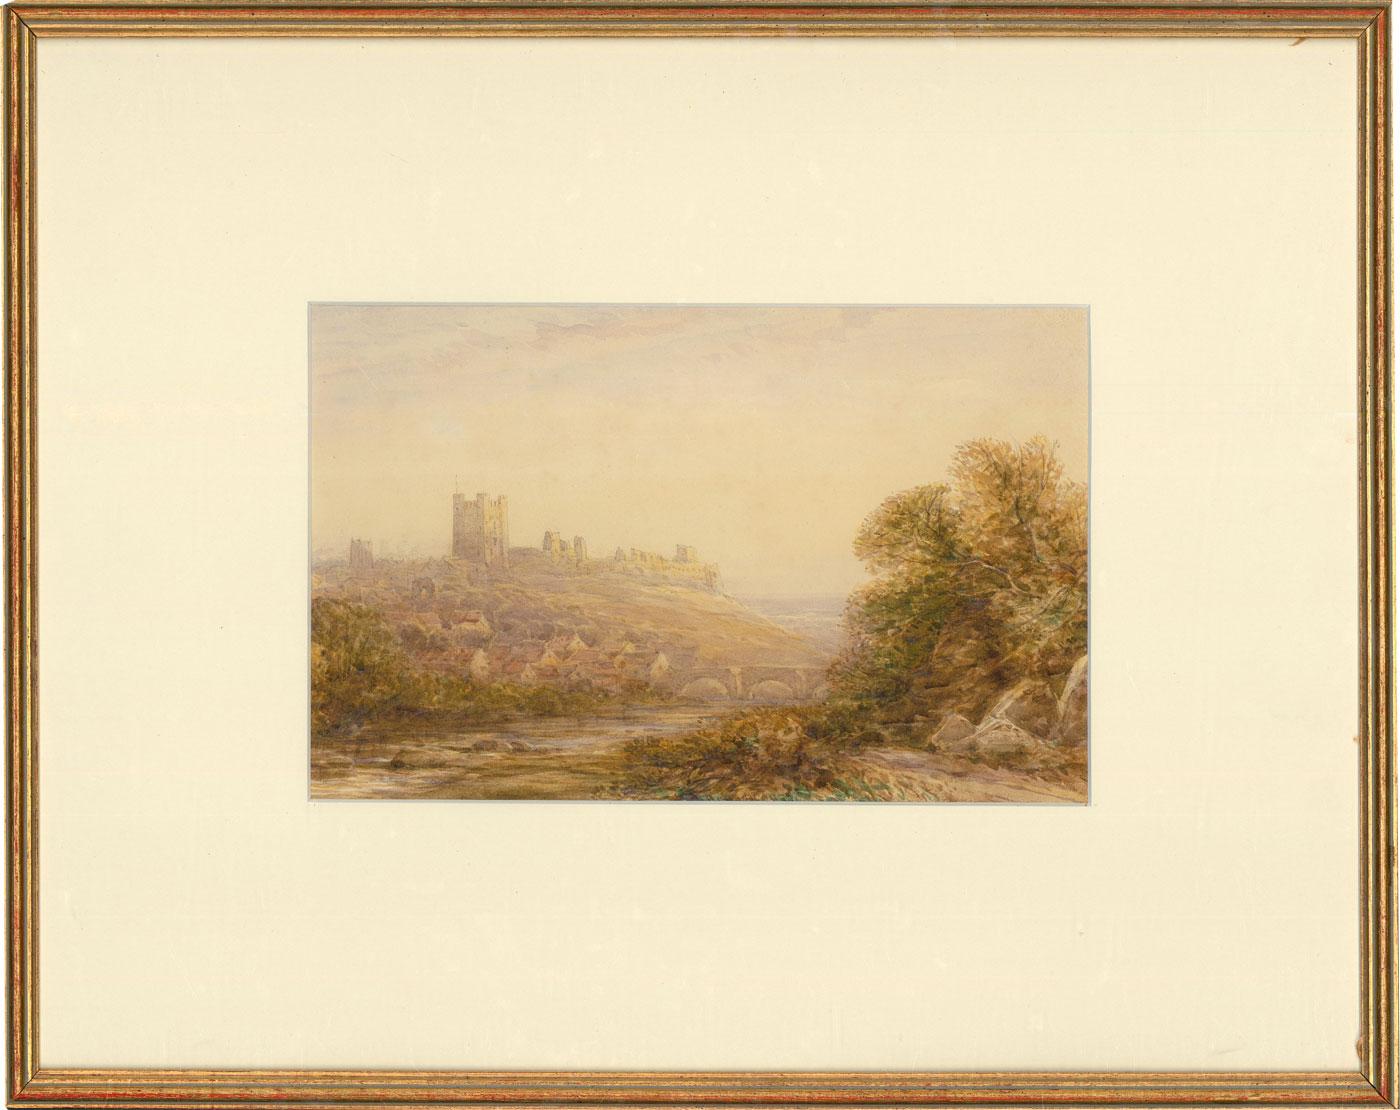 A delightful view of Richmond Castle in Yorkshire, England. The artist captures the vast landscape with the winding river and village to the foreground and the imposing castle sitting on the hill overlooking the scene. Faintly signed and dated to